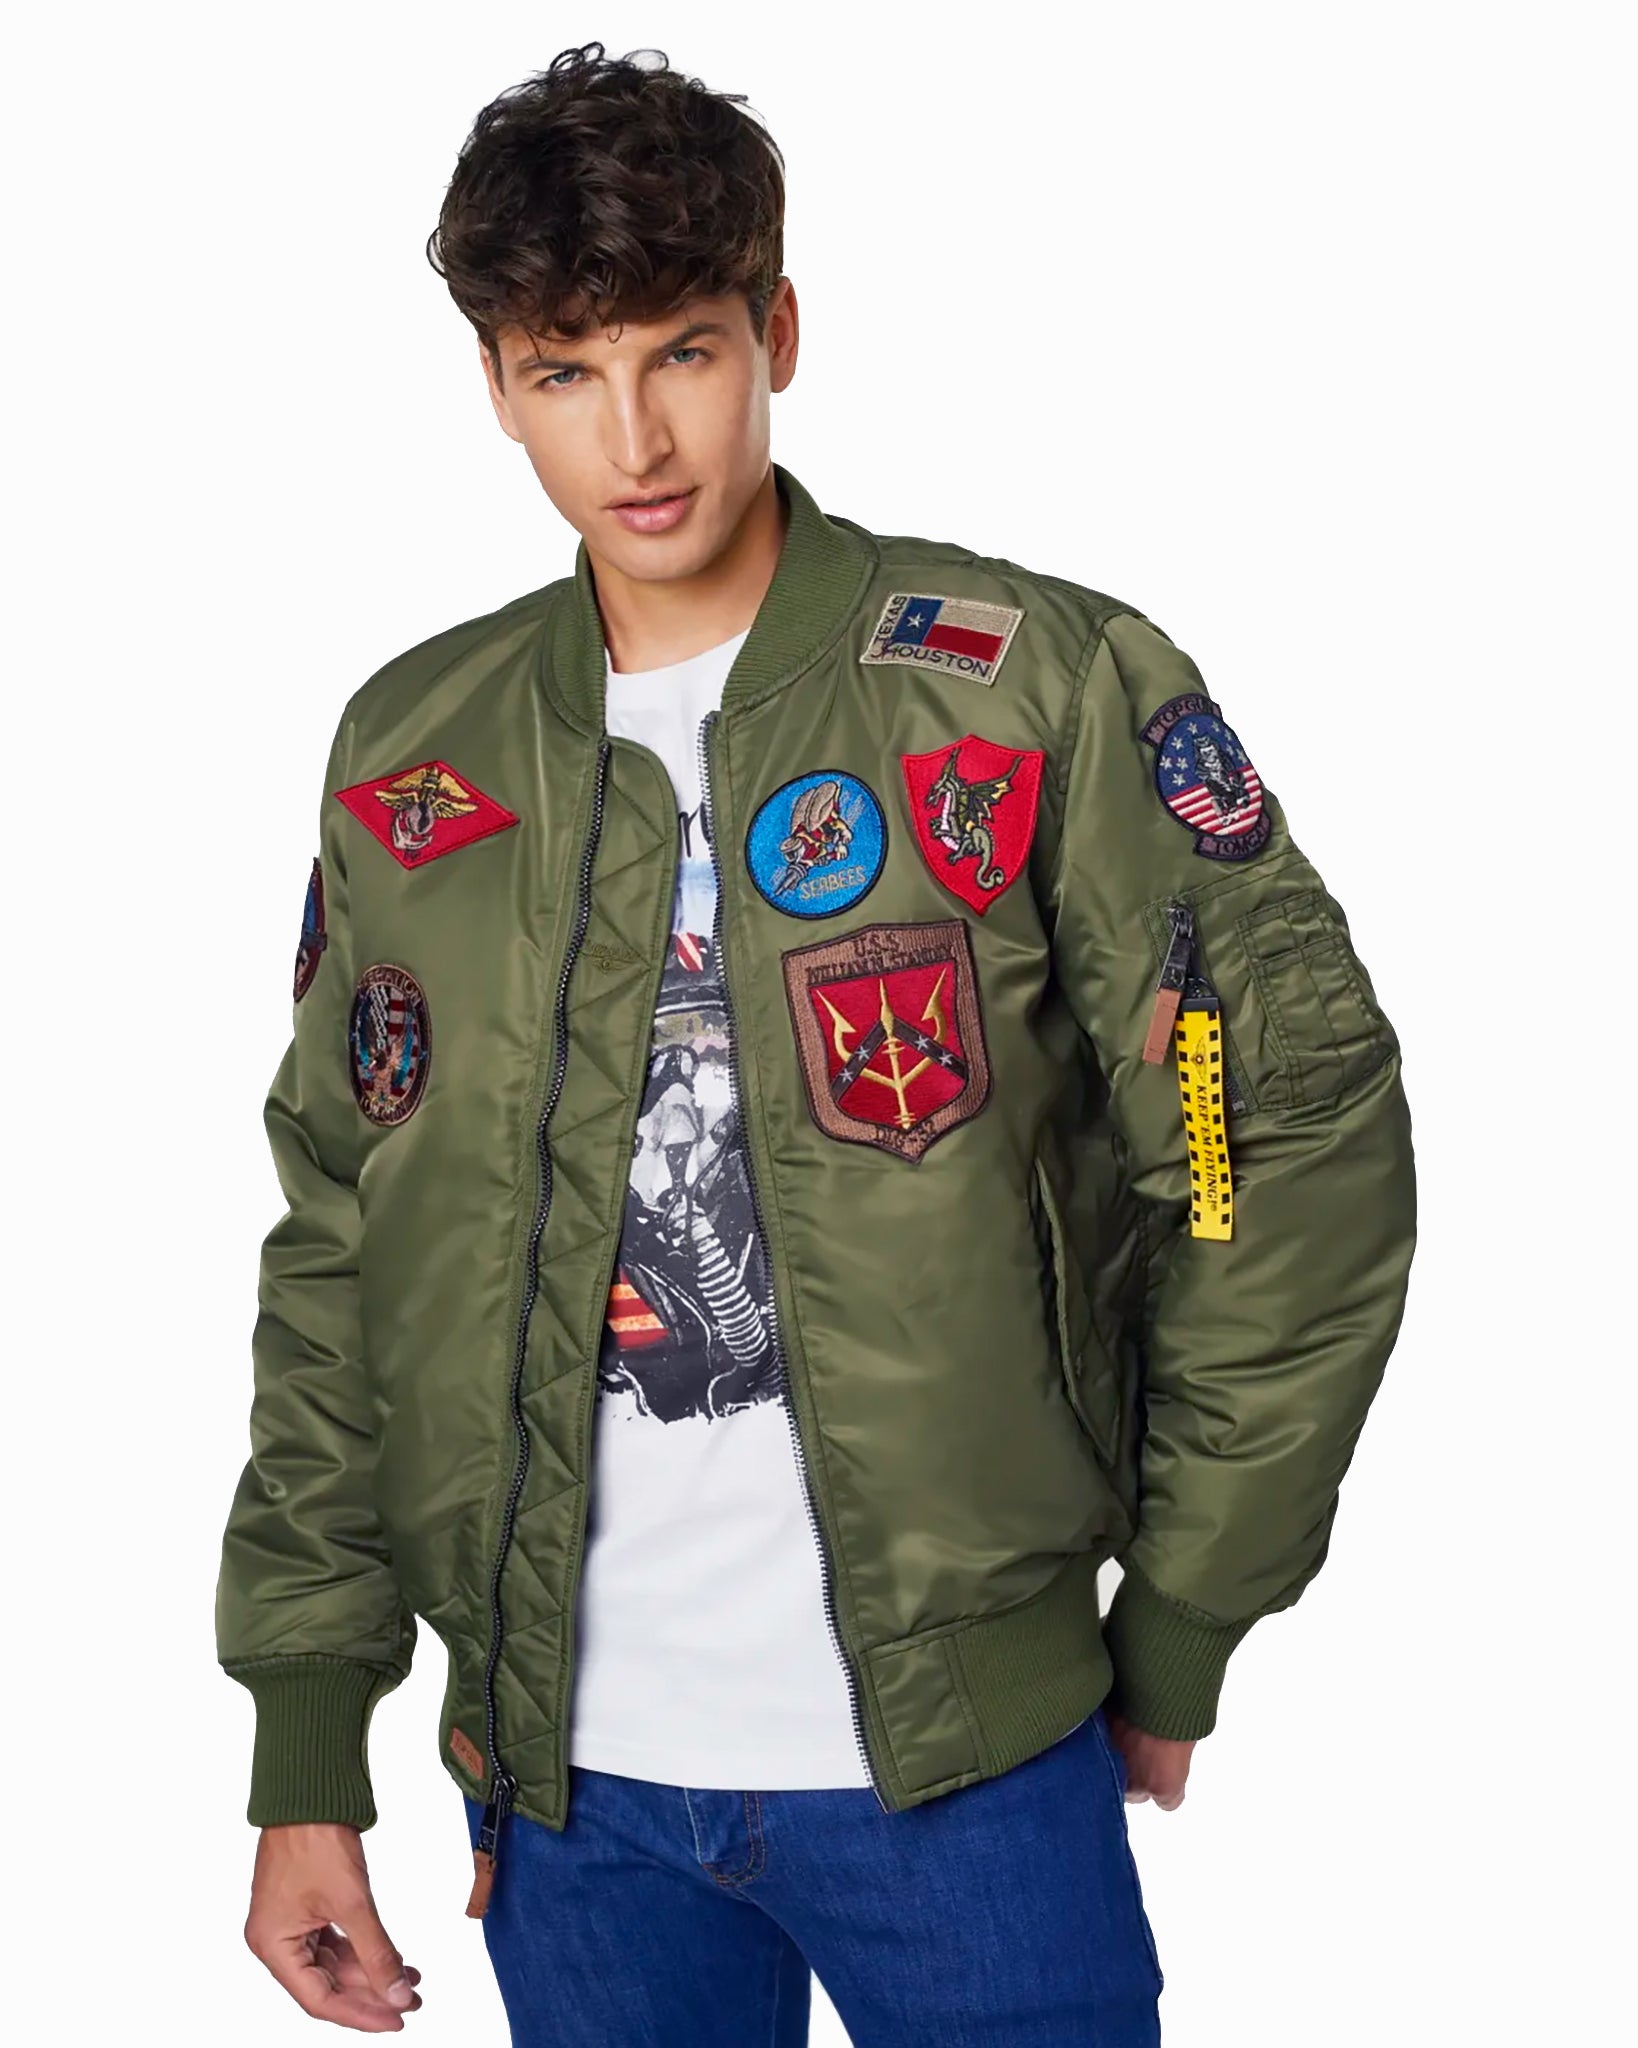 The Many Types Of Patches For Men's Jackets